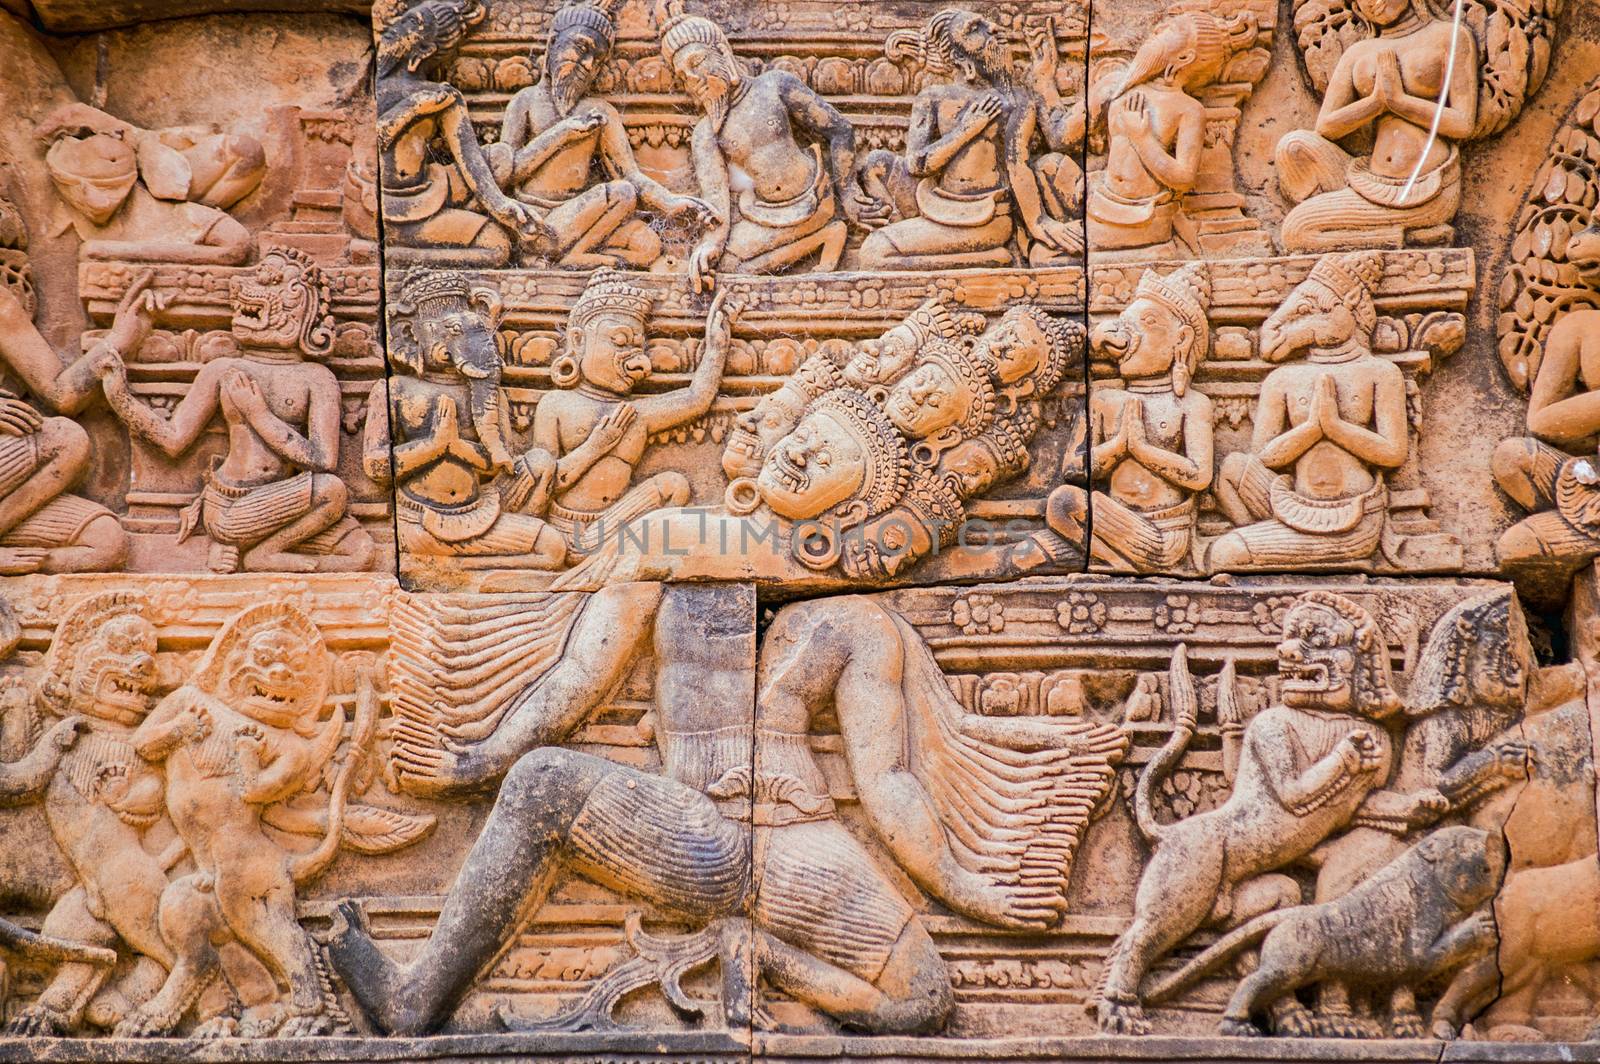 Ancient Khmer bas relief carving of Ravana the Hindu demon with one thousand heads and one thousand arms. Tympanum of the south library at Banteay Srei Temple, Angkor, Cambodia.